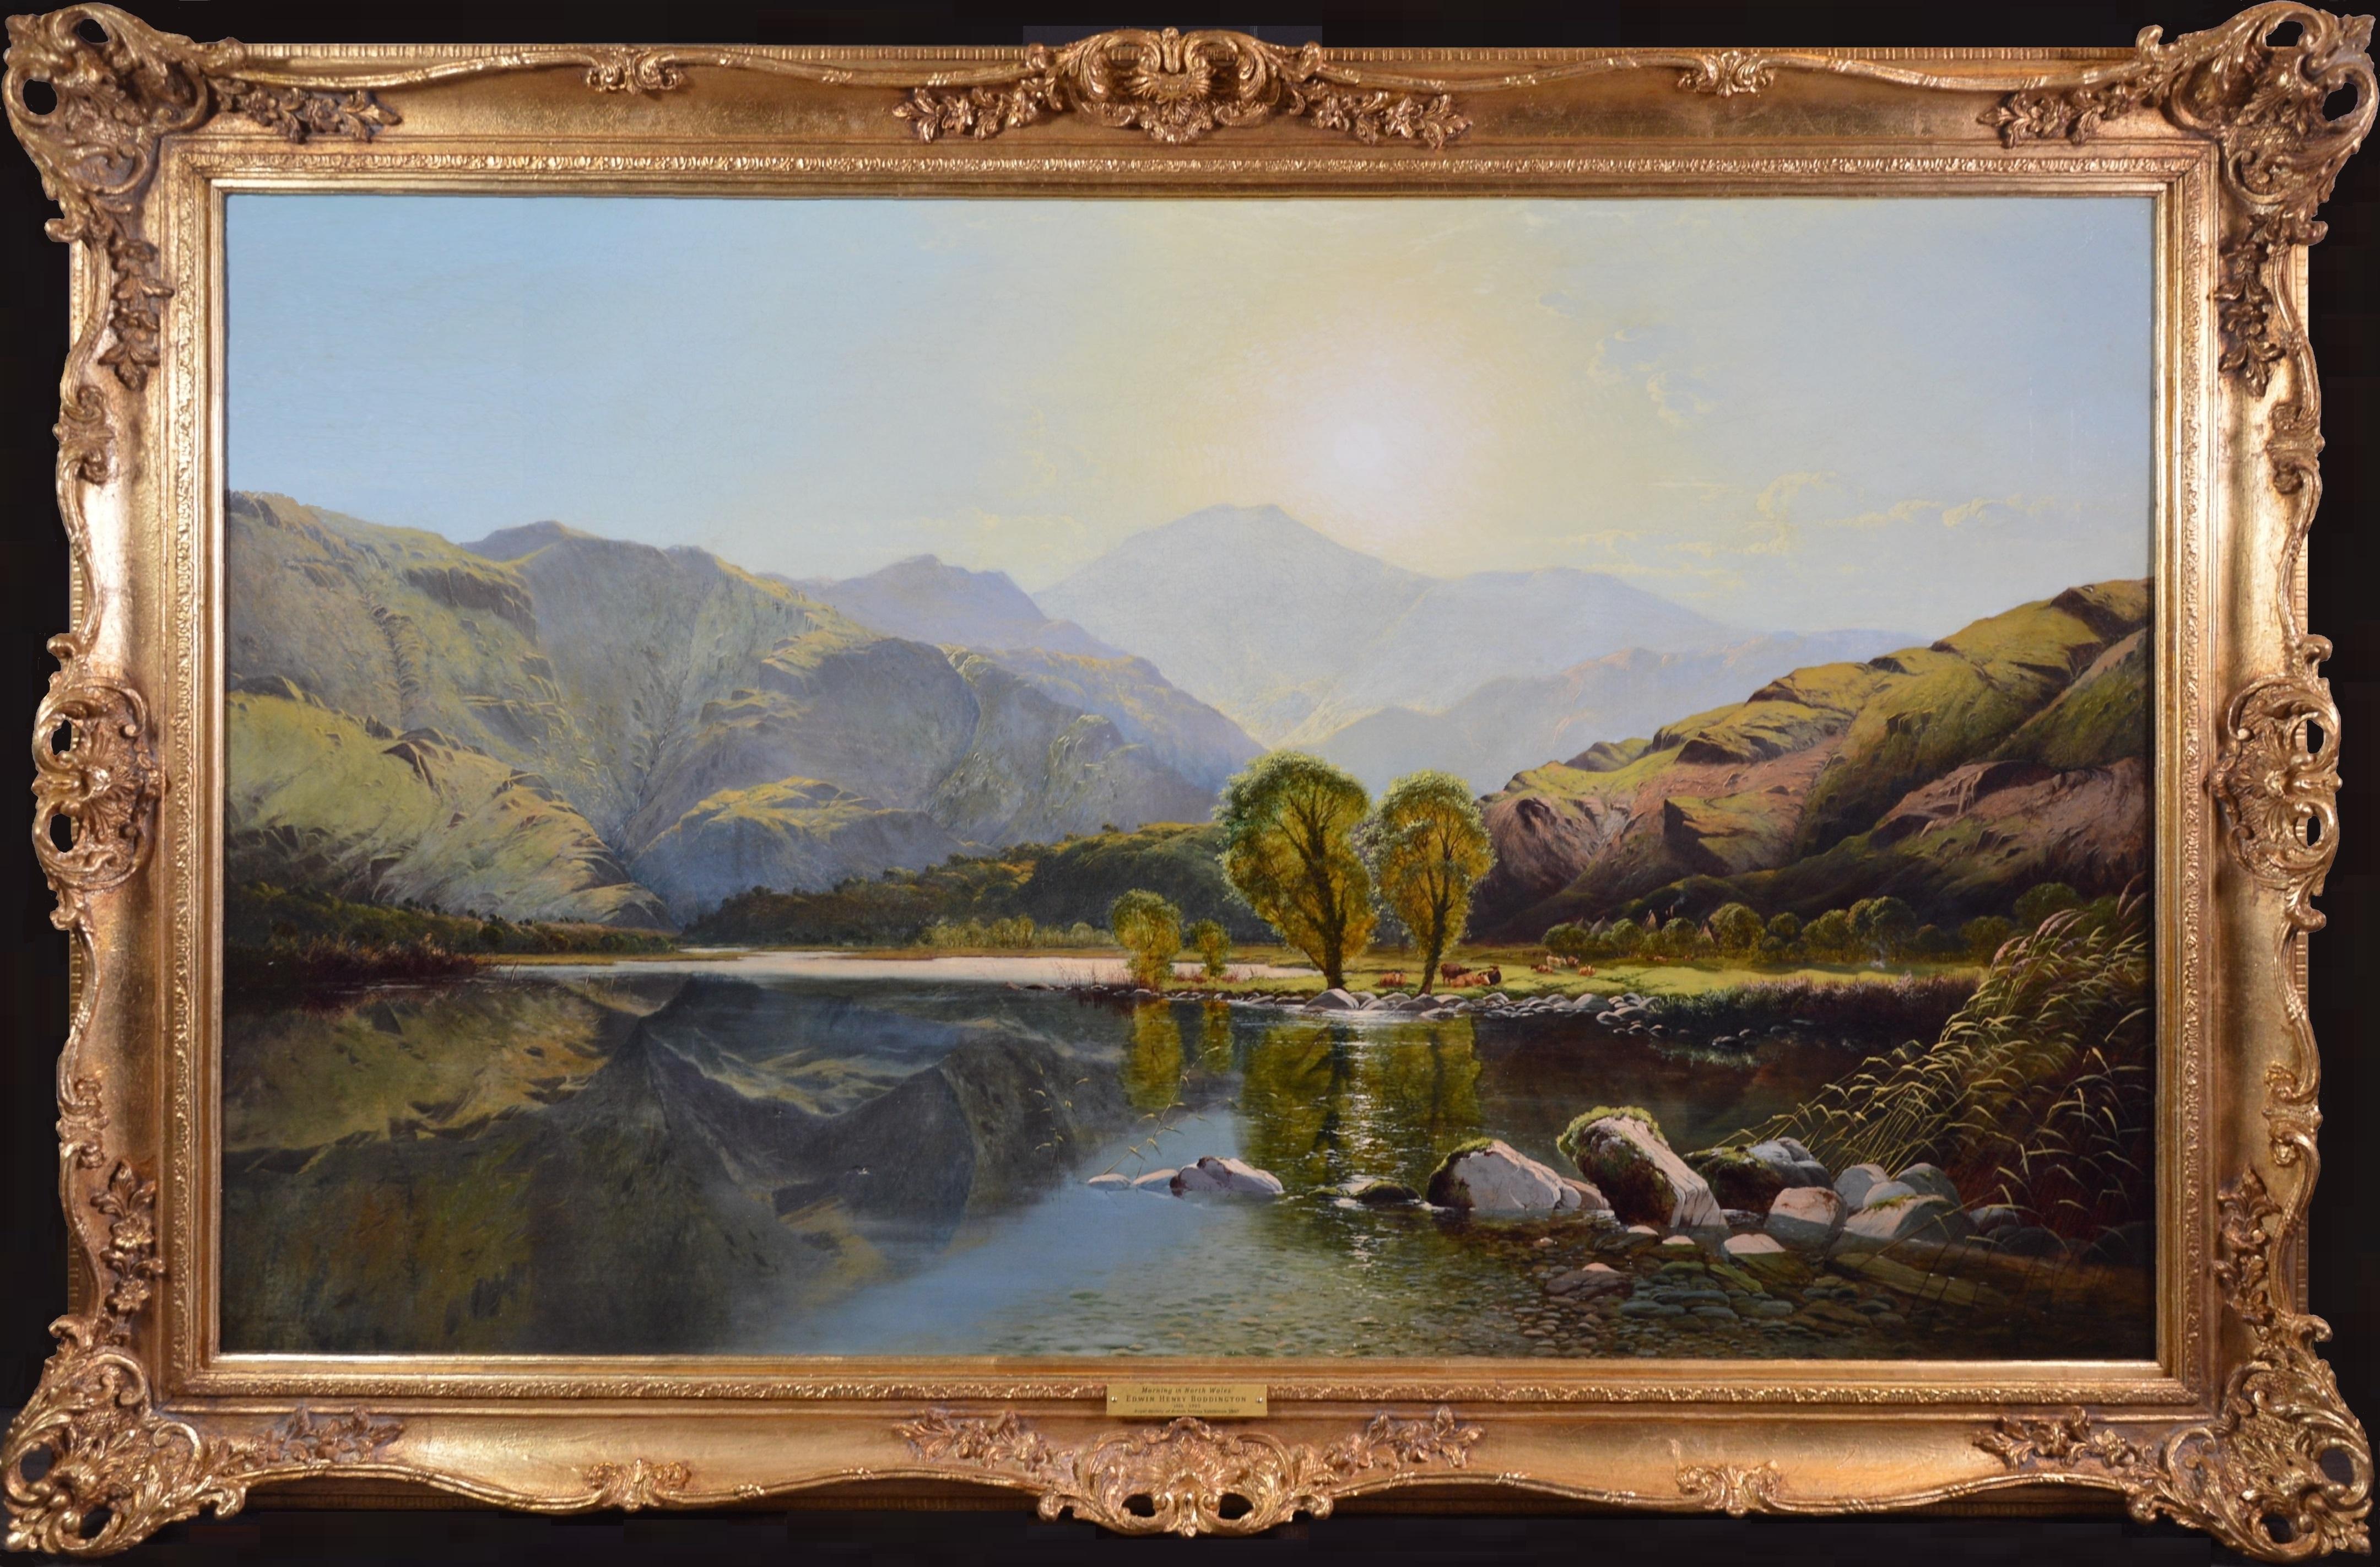 Sunrise in North Wales - Large 19th Century Exhibition Landscape Oil Painting - Brown Landscape Painting by Edwin H Boddington